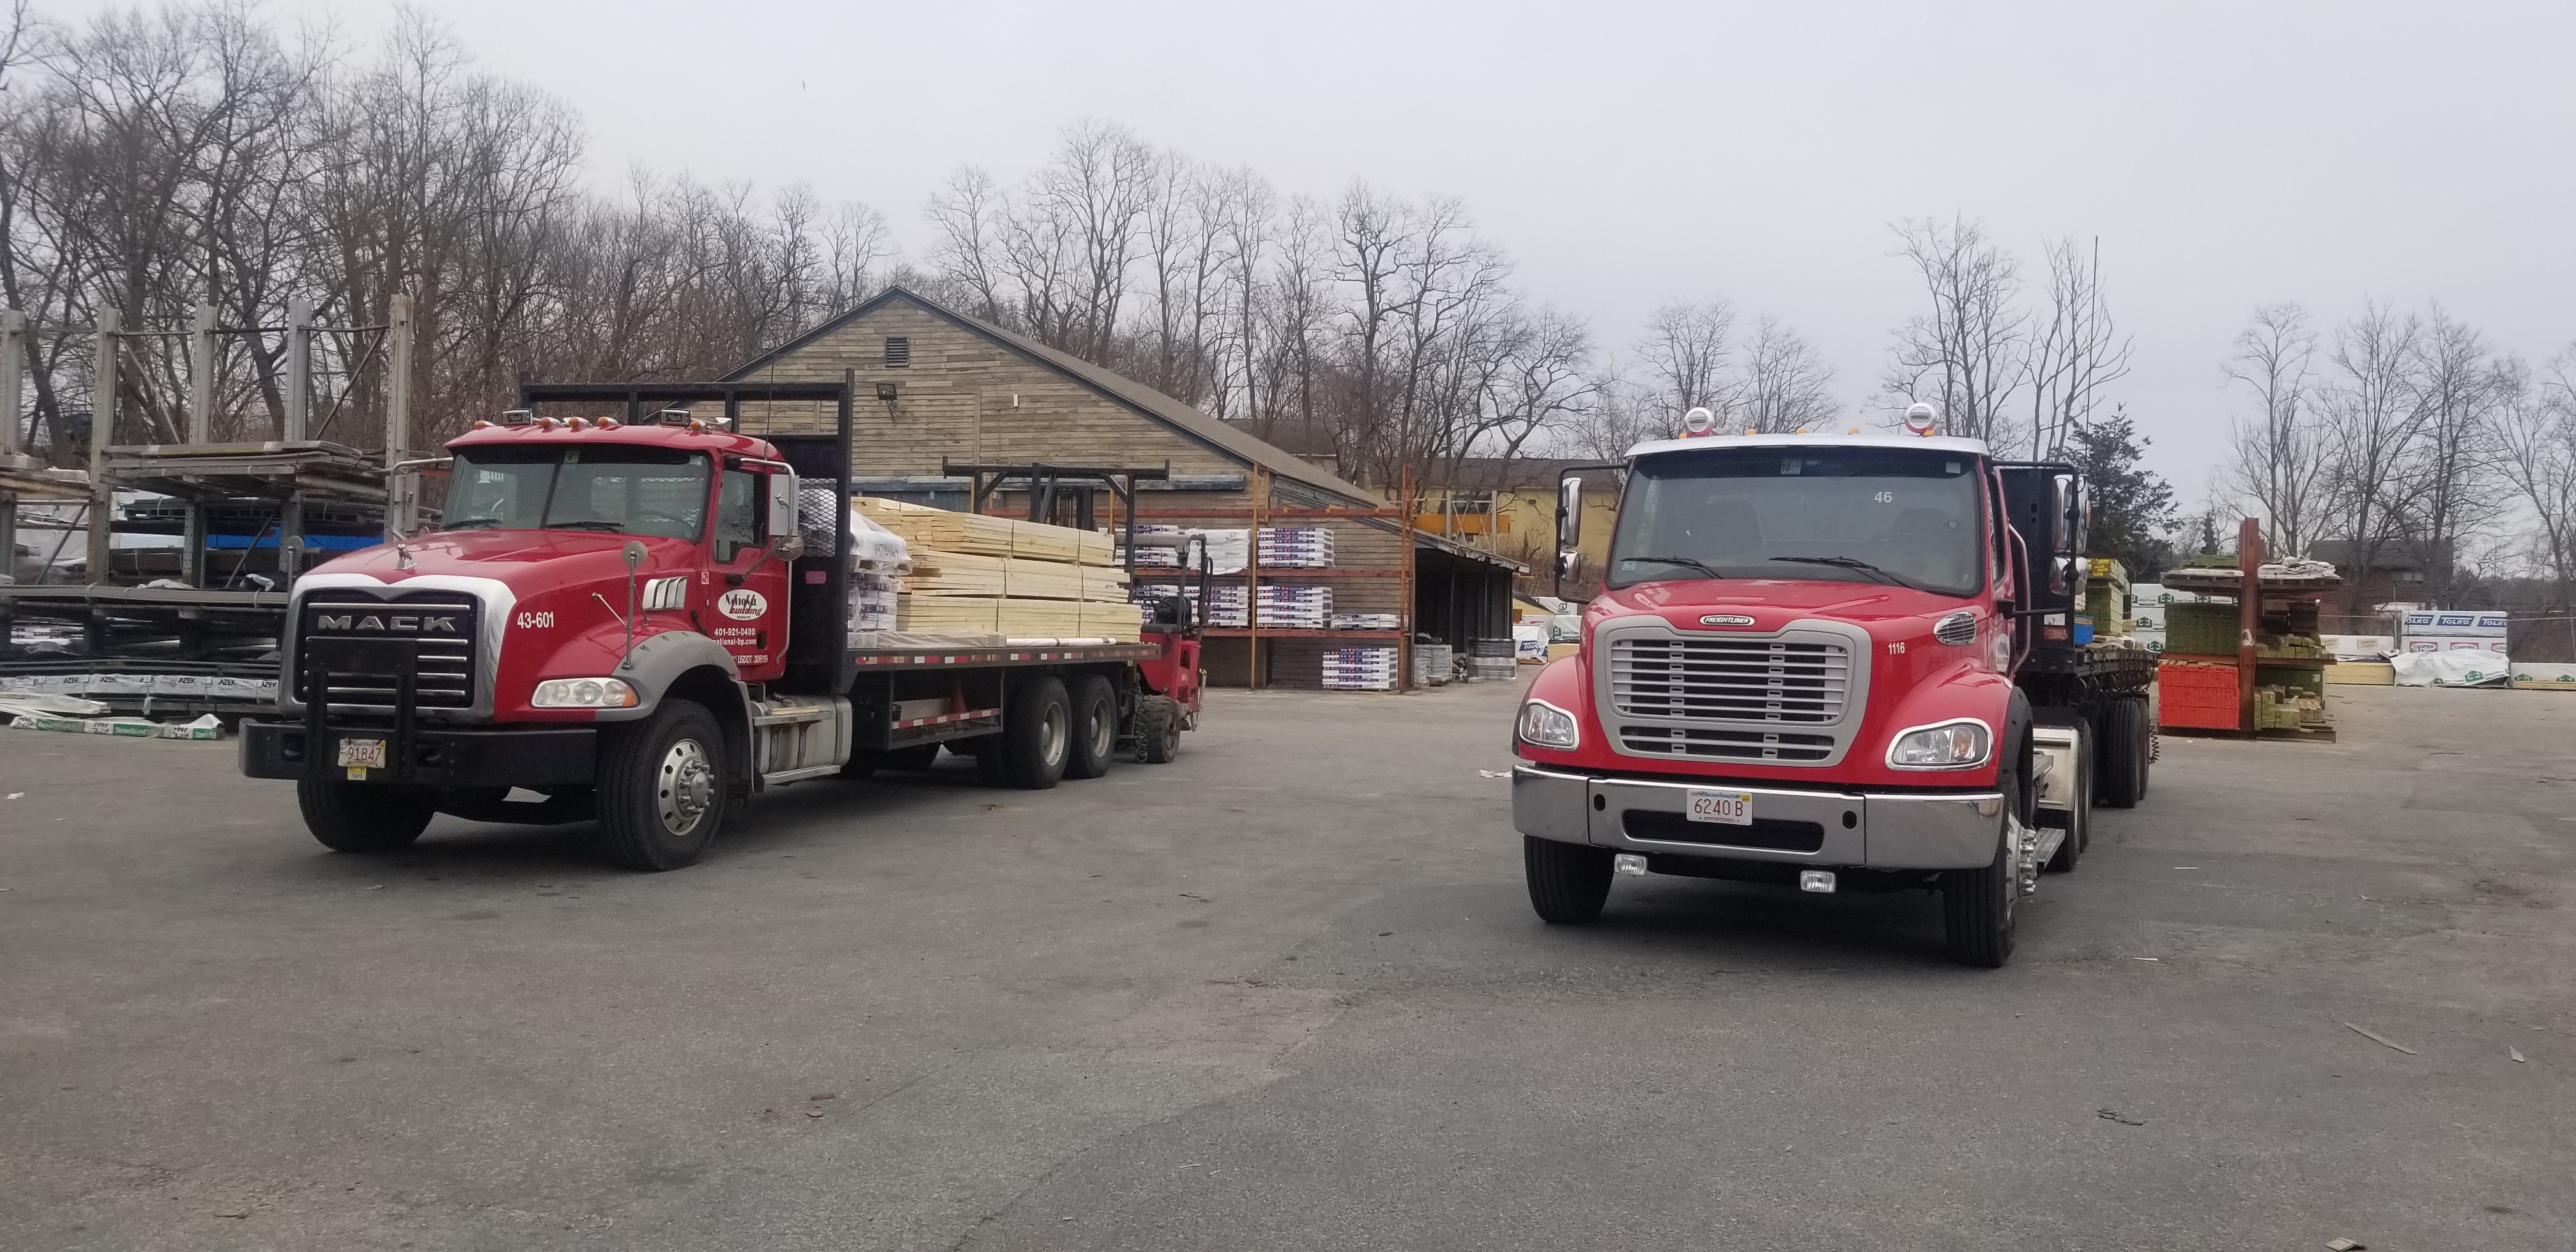 National Building Products Flatbeds Loaded Up and Ready to Make Deliveries!